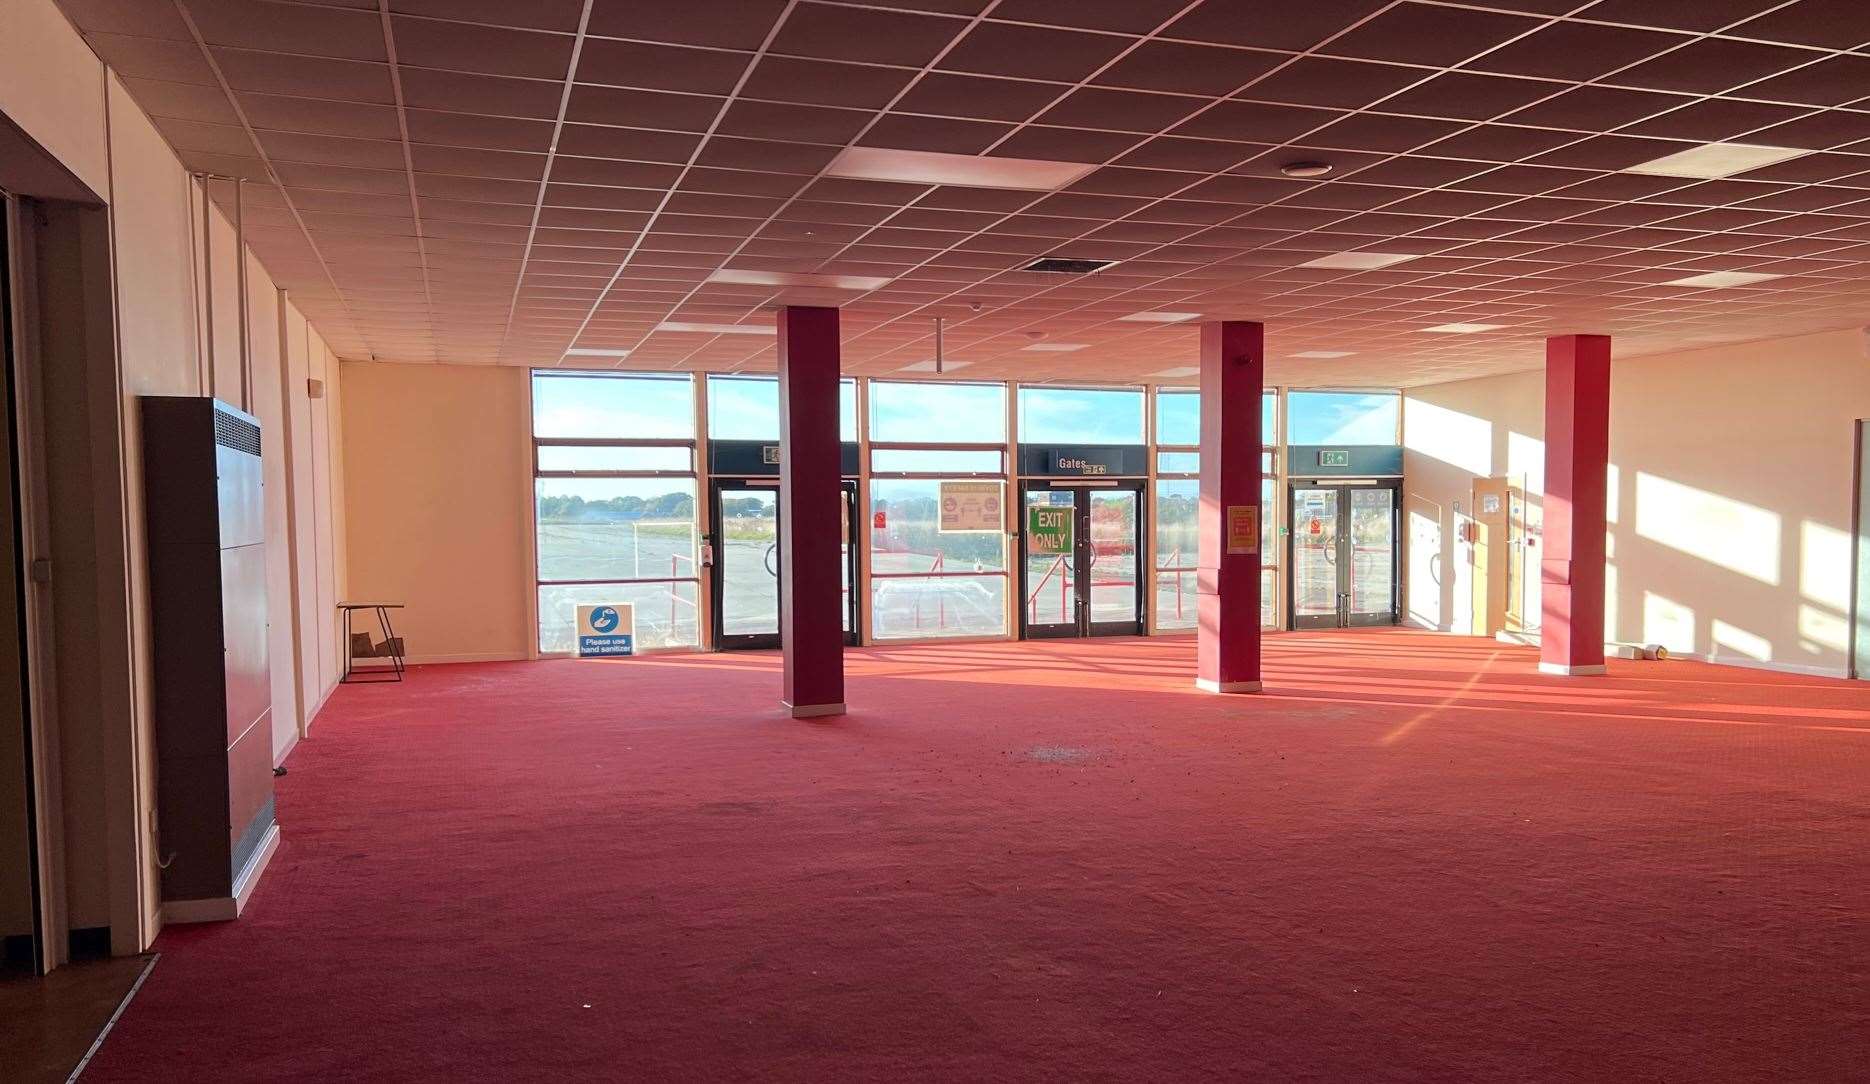 Departure lounge at Manston Airport - once a popular passenger terminal